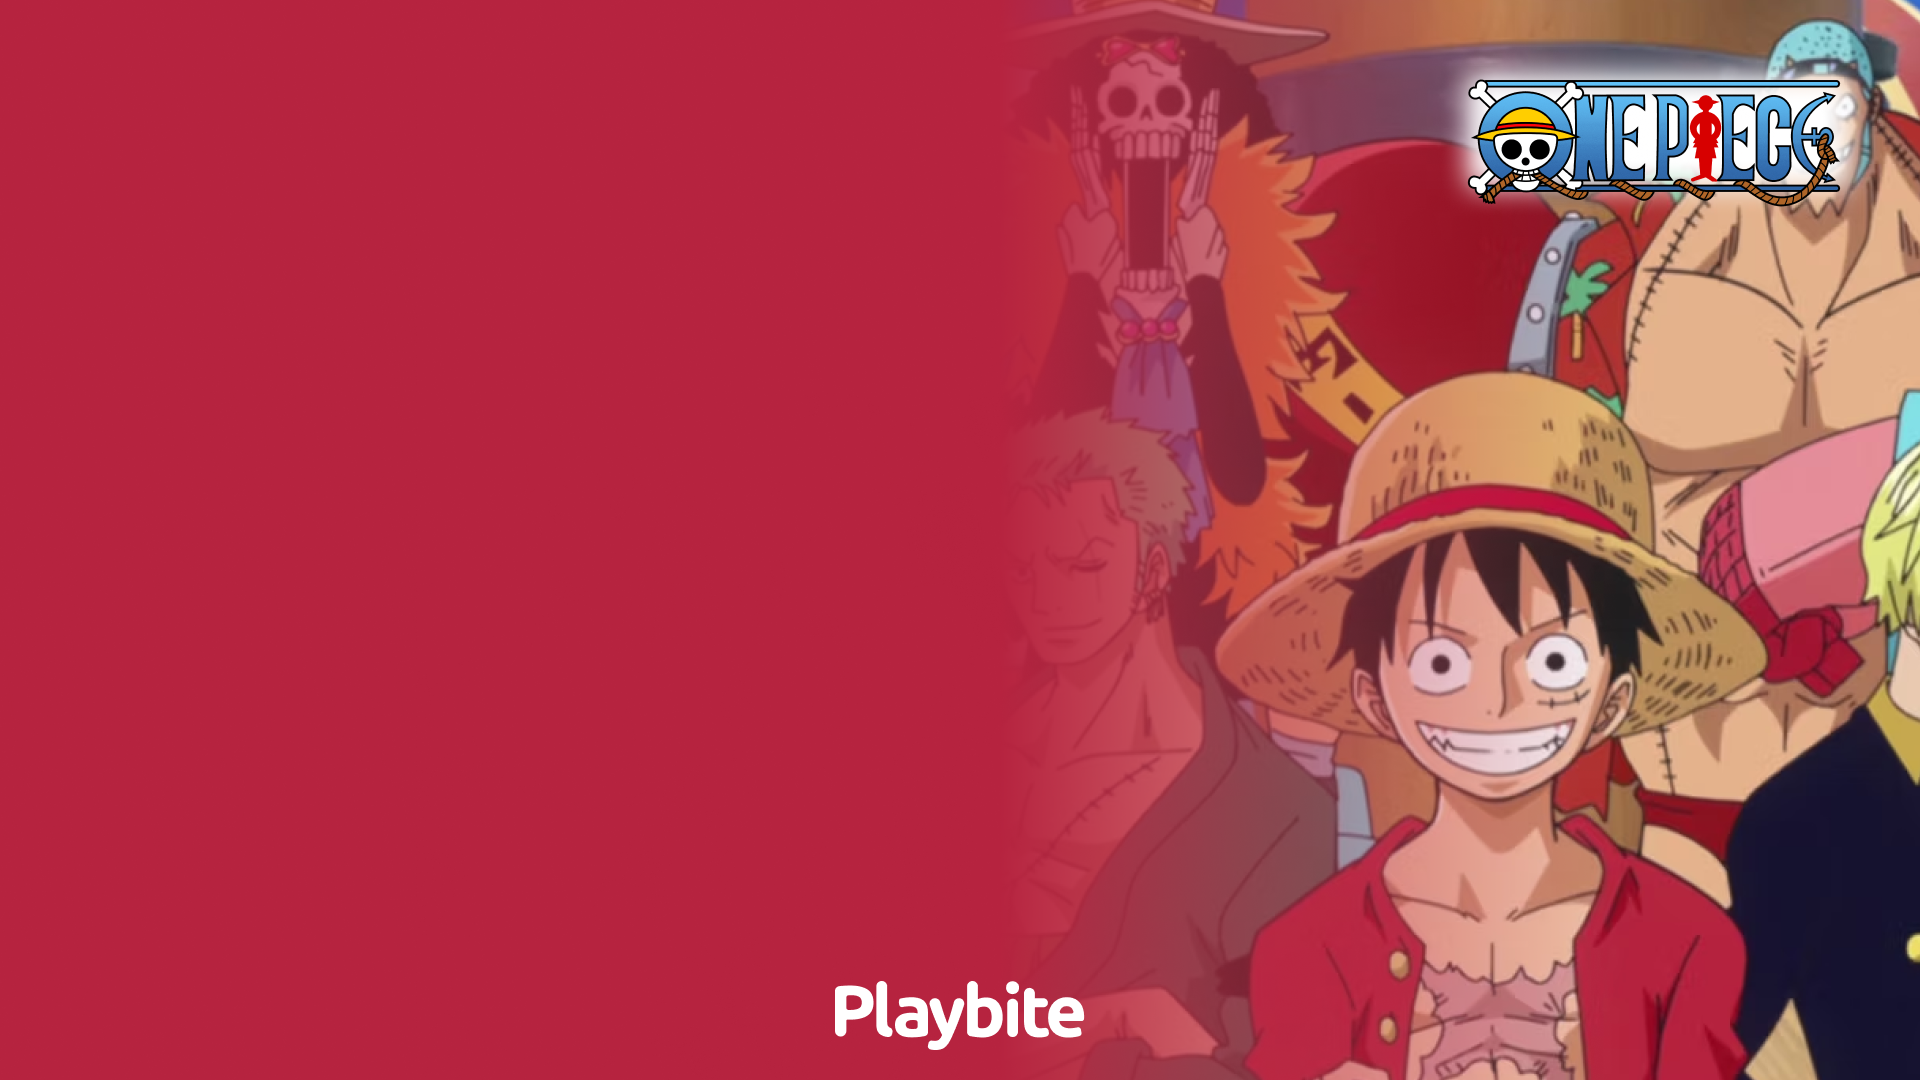 Where Can I Read the One Piece Manga for Free?